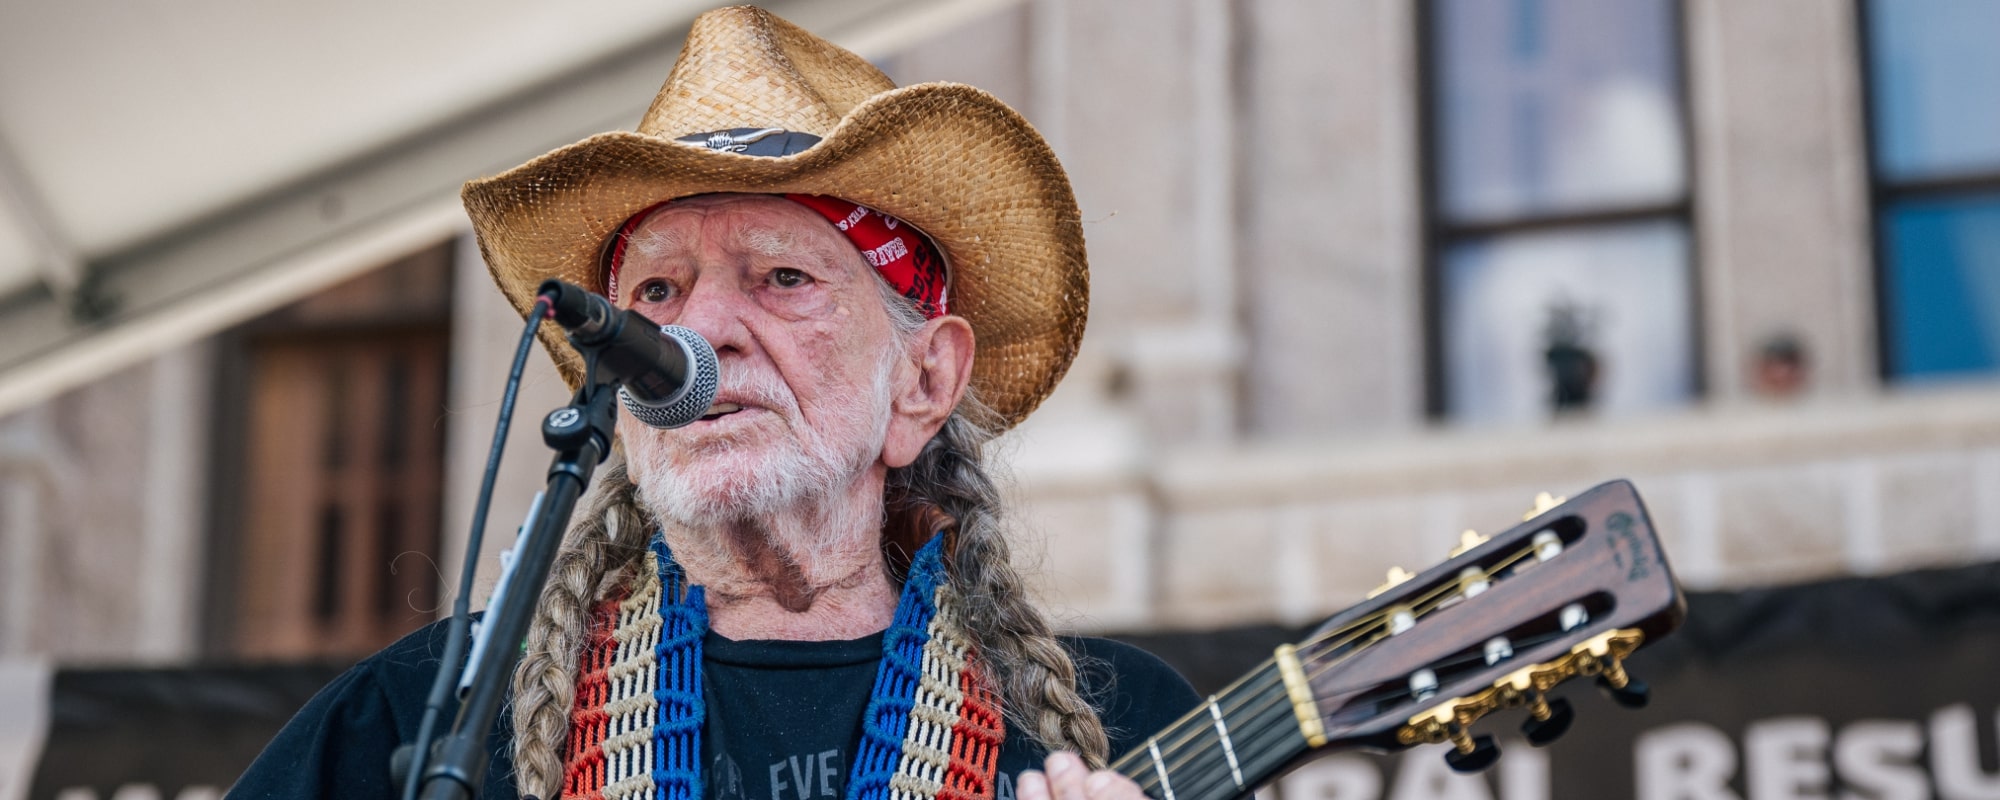 Country legend Willie Nelson released a new album today